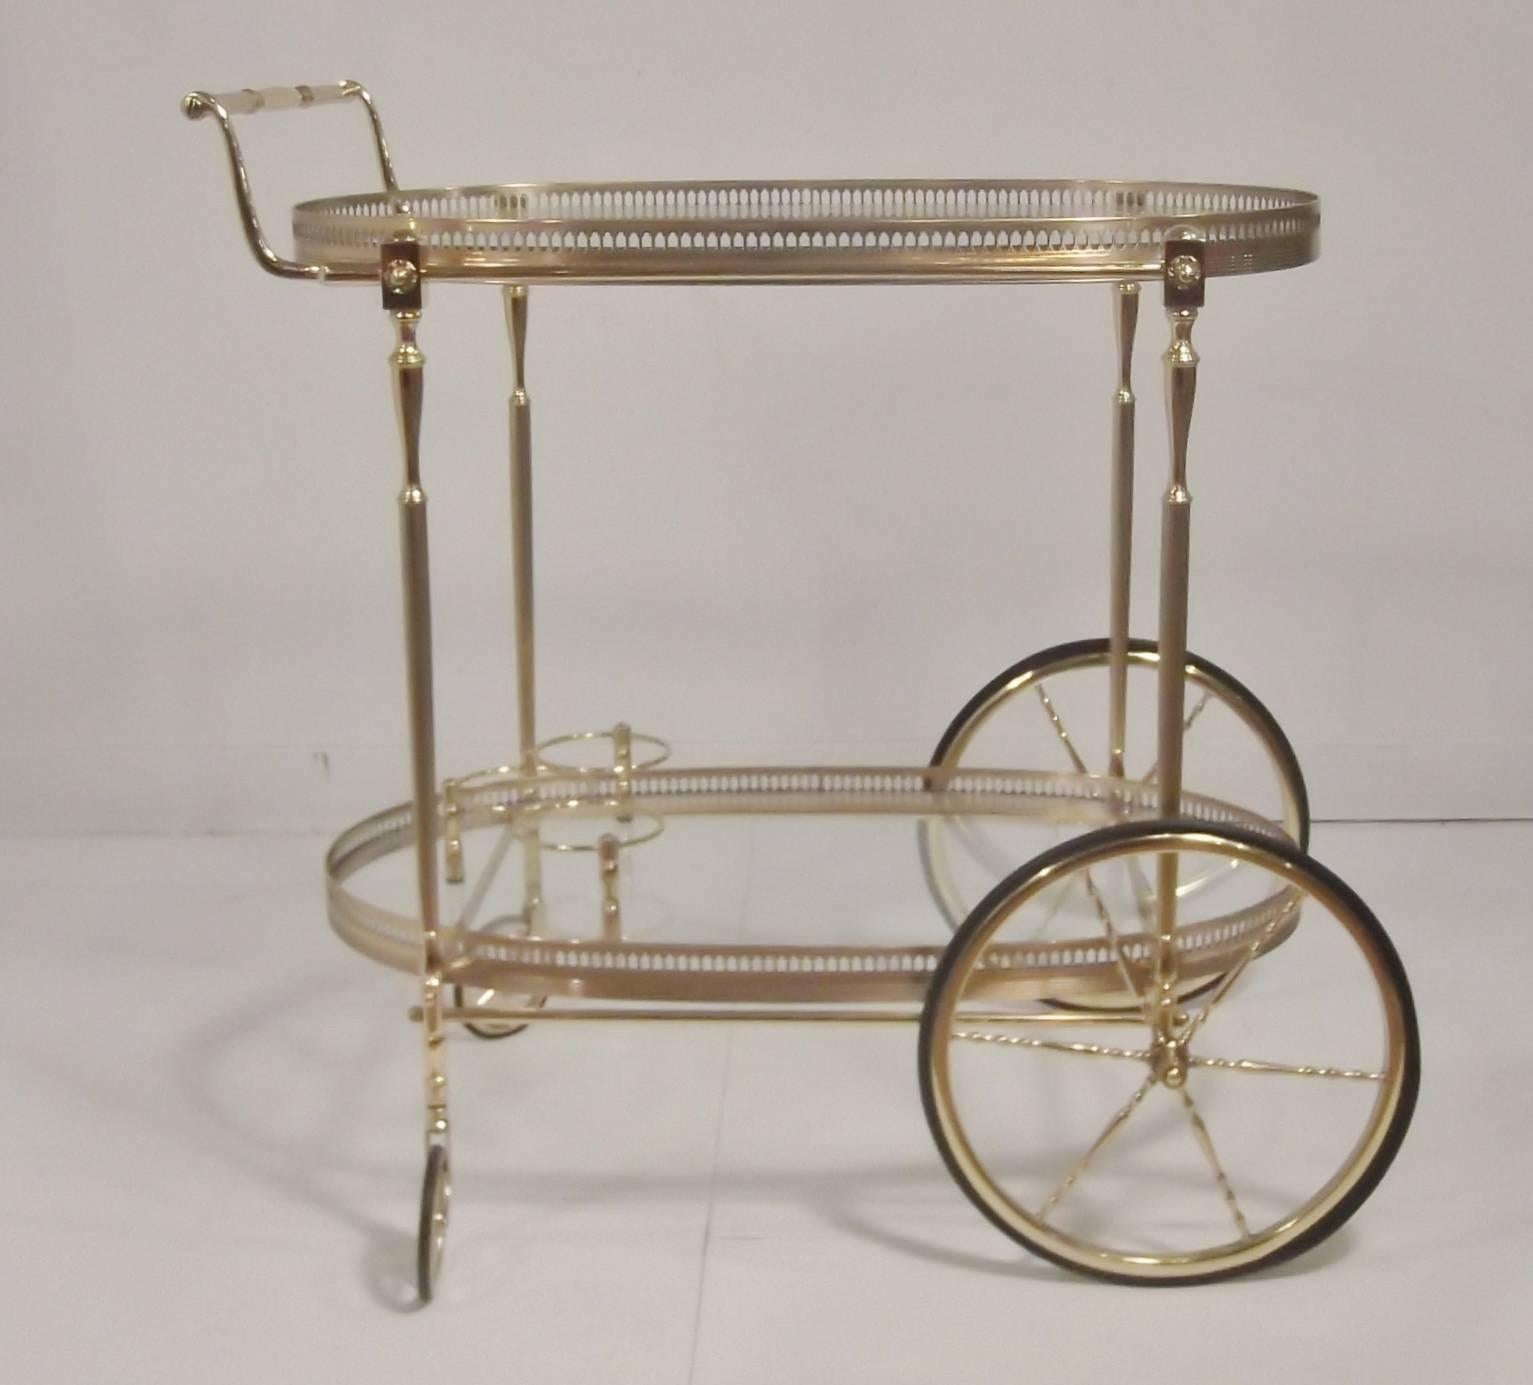 Oval polished brass two-tiered bar cart with gallery edge. The cart rests on two large and two small bicycle wheels with the front rotating 360 degrees.

The finish is bright and clean. The rubber on the wheels is fresh and pliable.